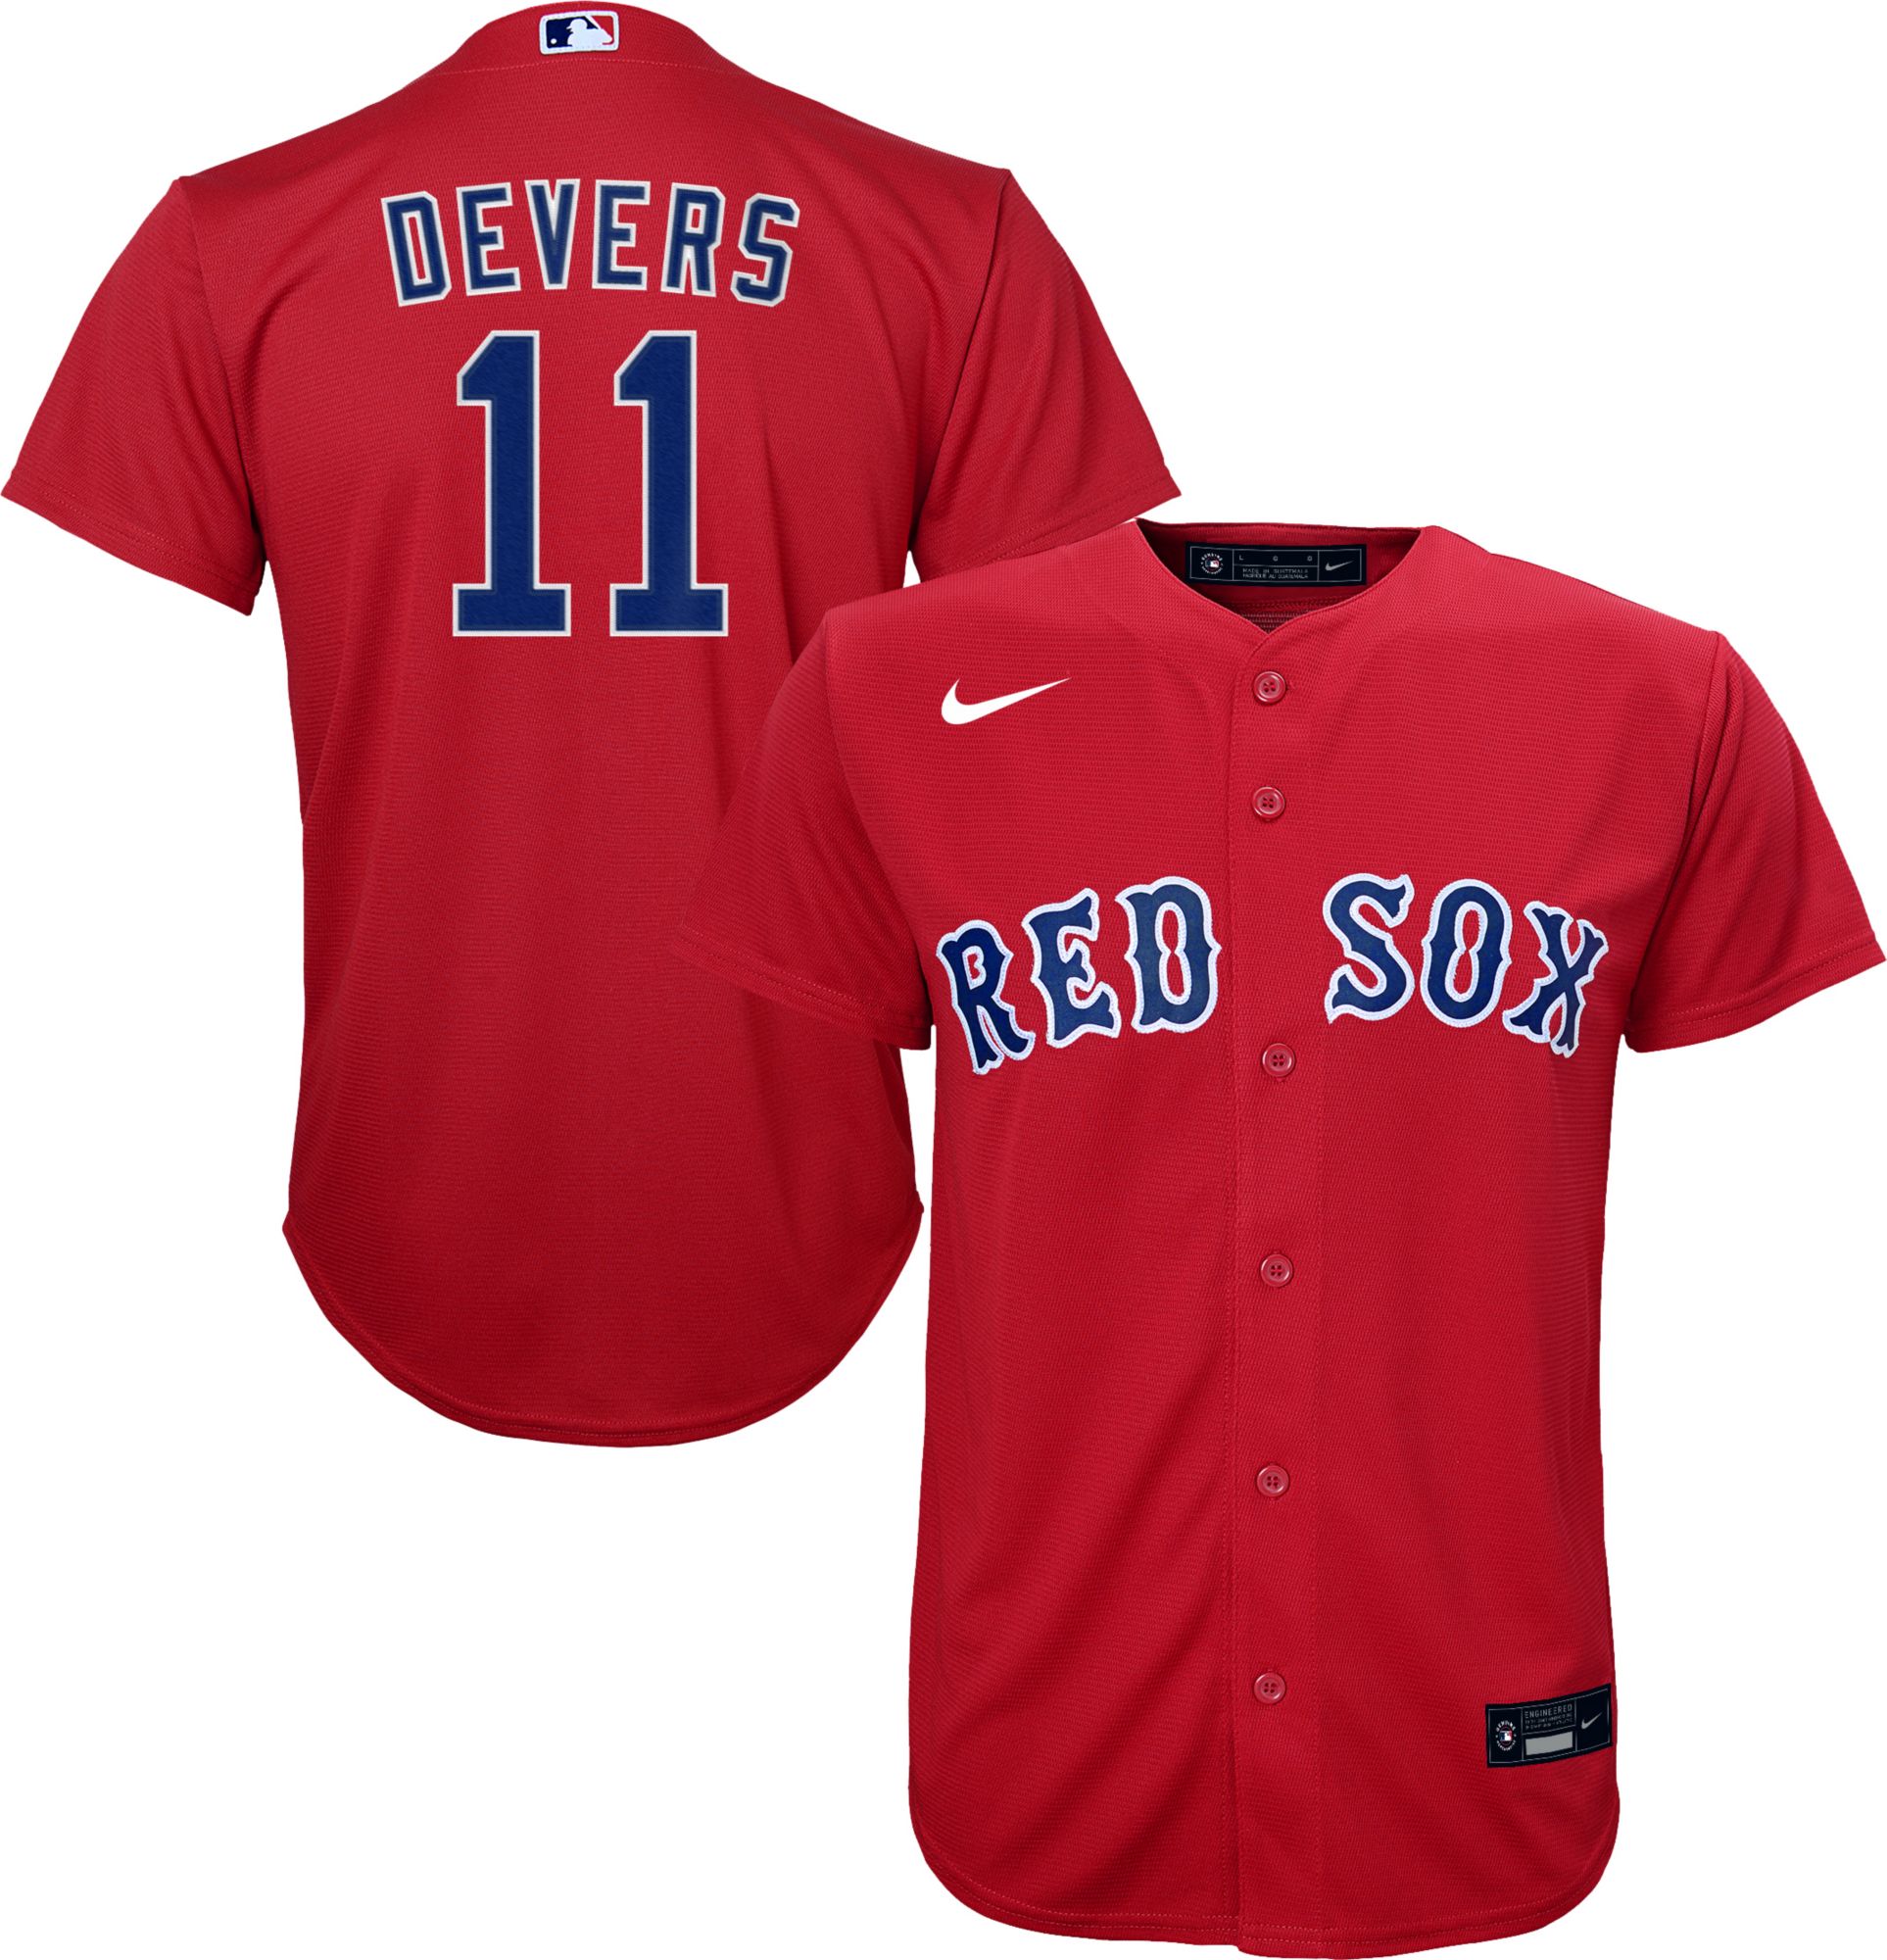 Youth Replica Boston Red Sox Rafael Devers #11 Cool Base Red Jersey